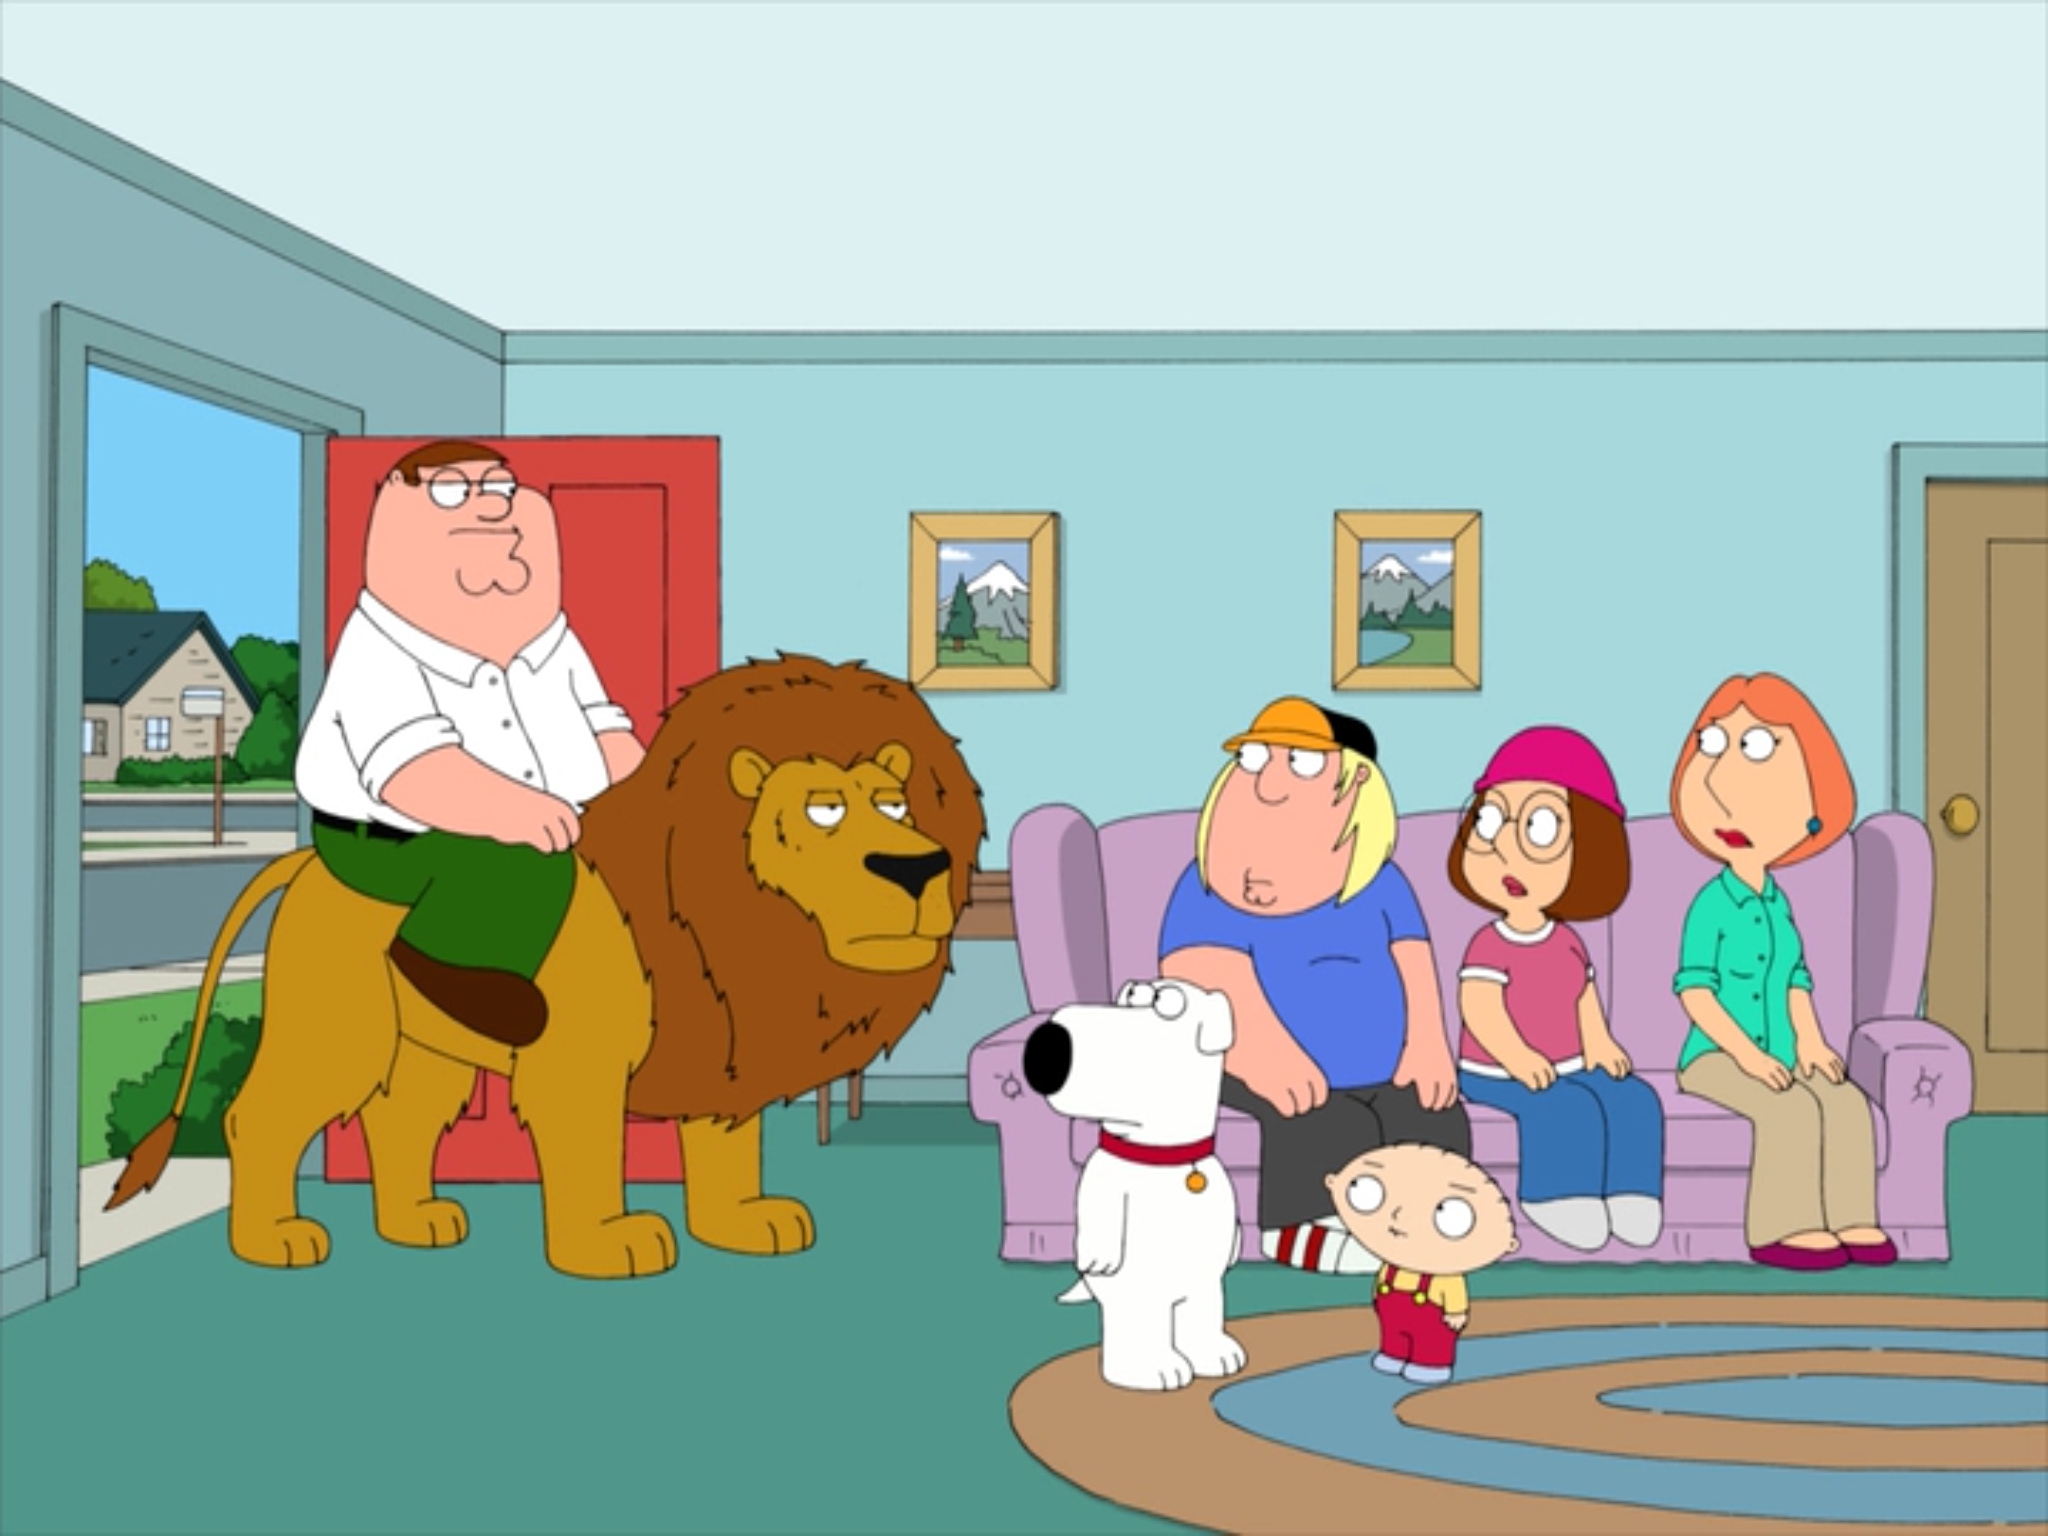 Family Guy - King of The Hill Theme by dlee1293847 on DeviantArt